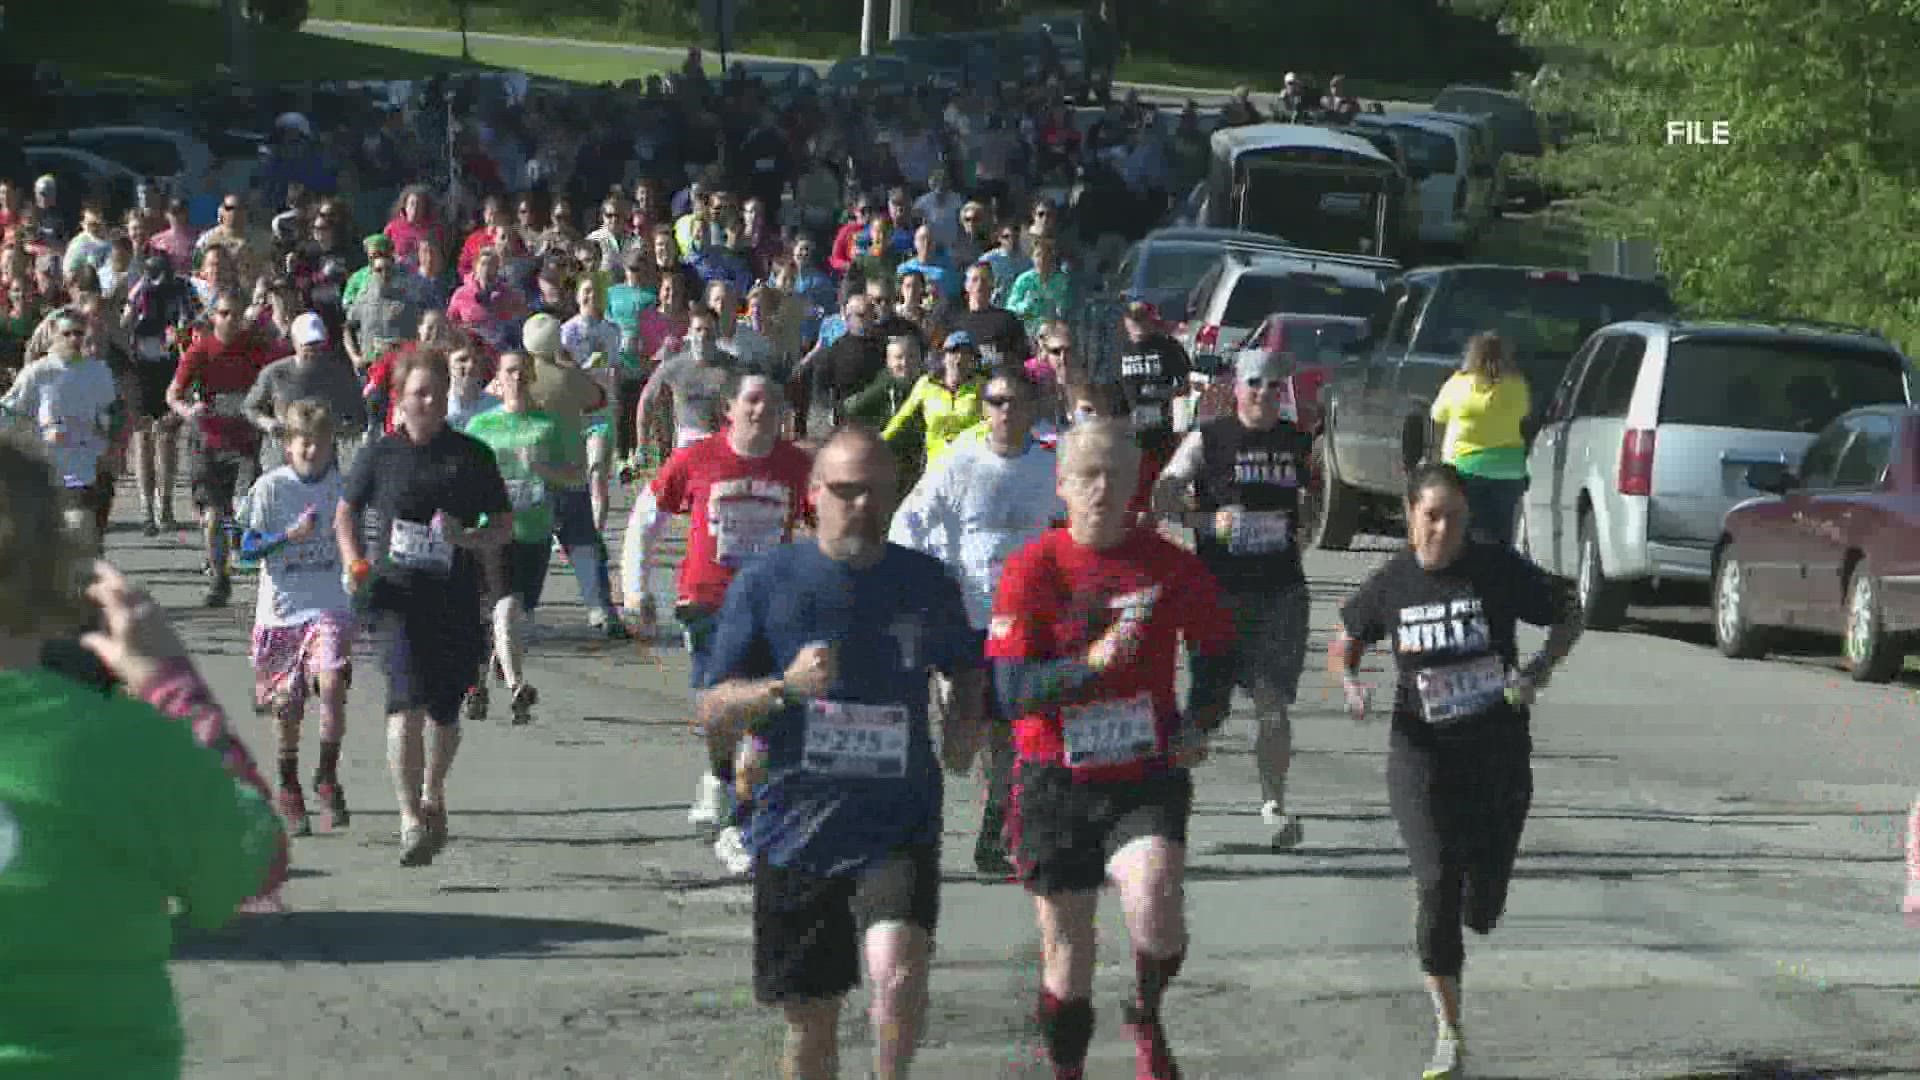 The annual race will raise funds for the Travis Mills Foundation.